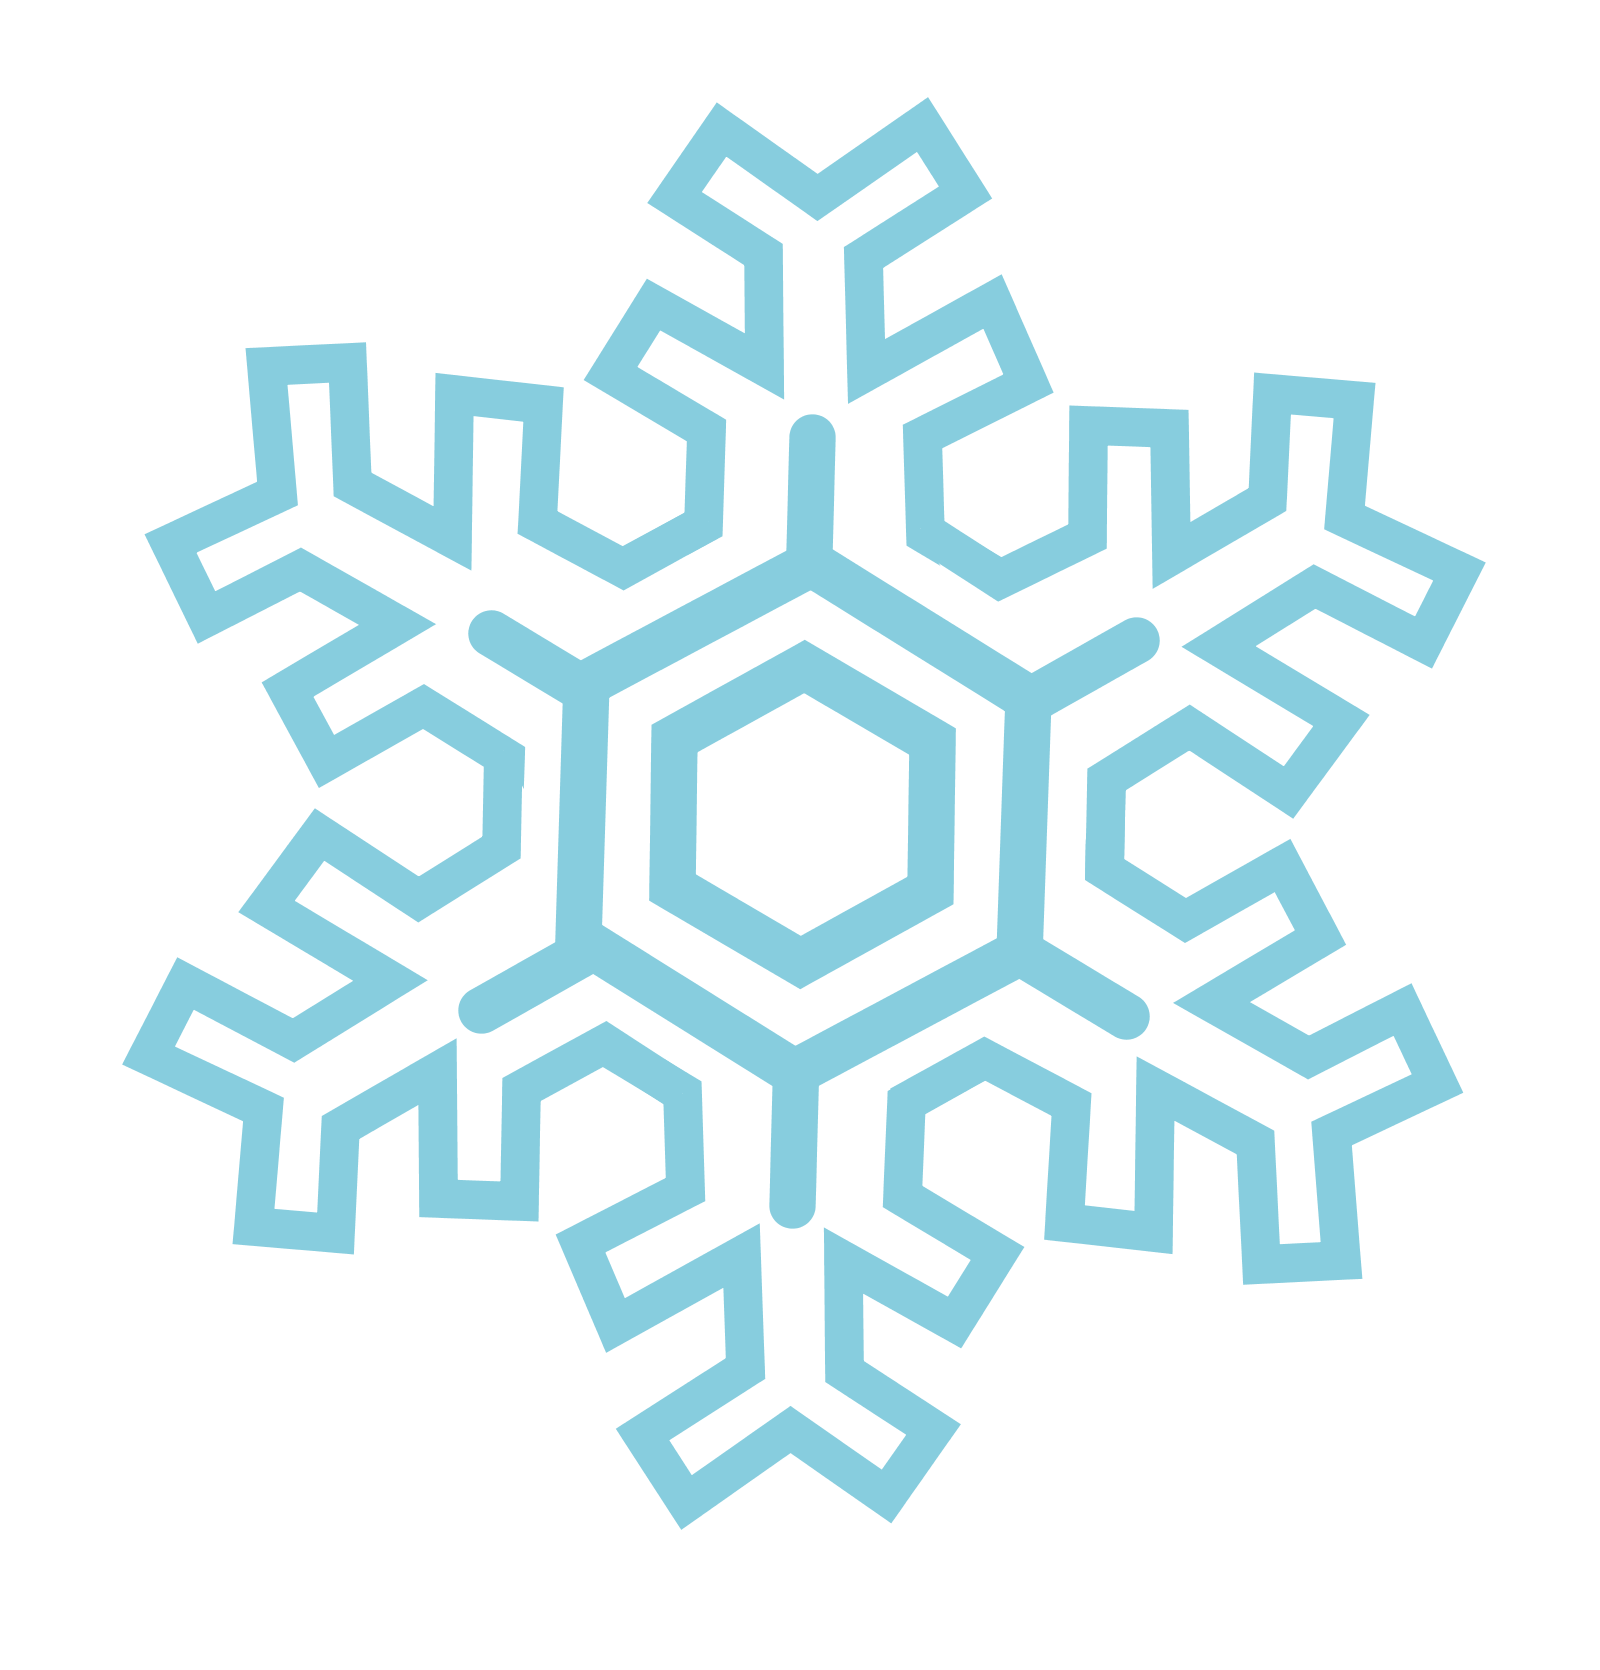 Download PNG image - Snowflakes Transparent Background 